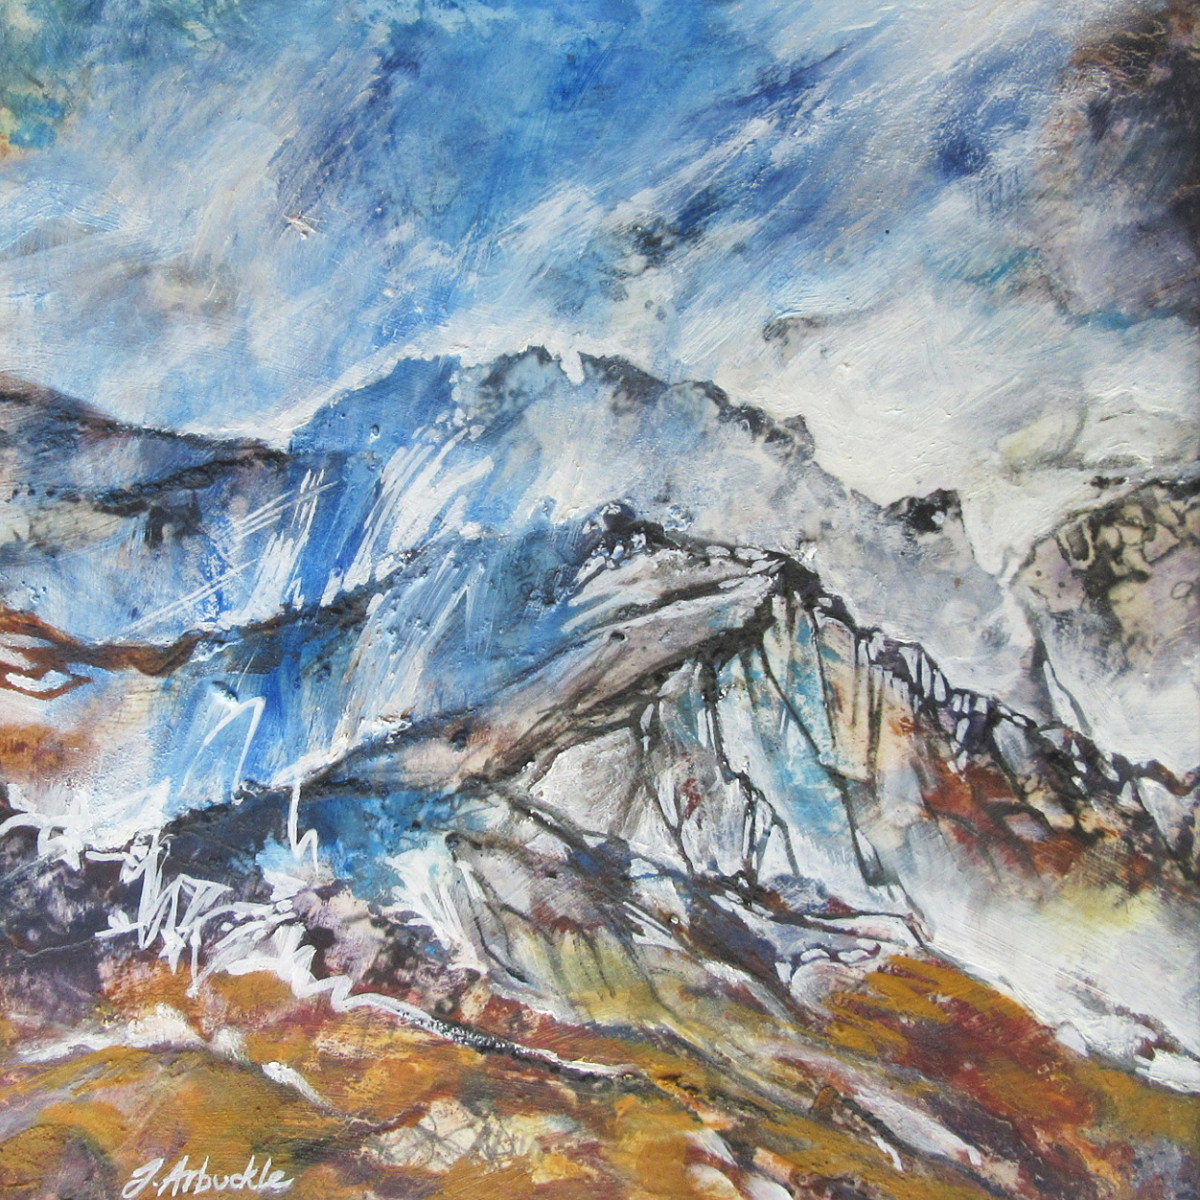 Passing Shower on the Ridge by Julie Arbuckle 